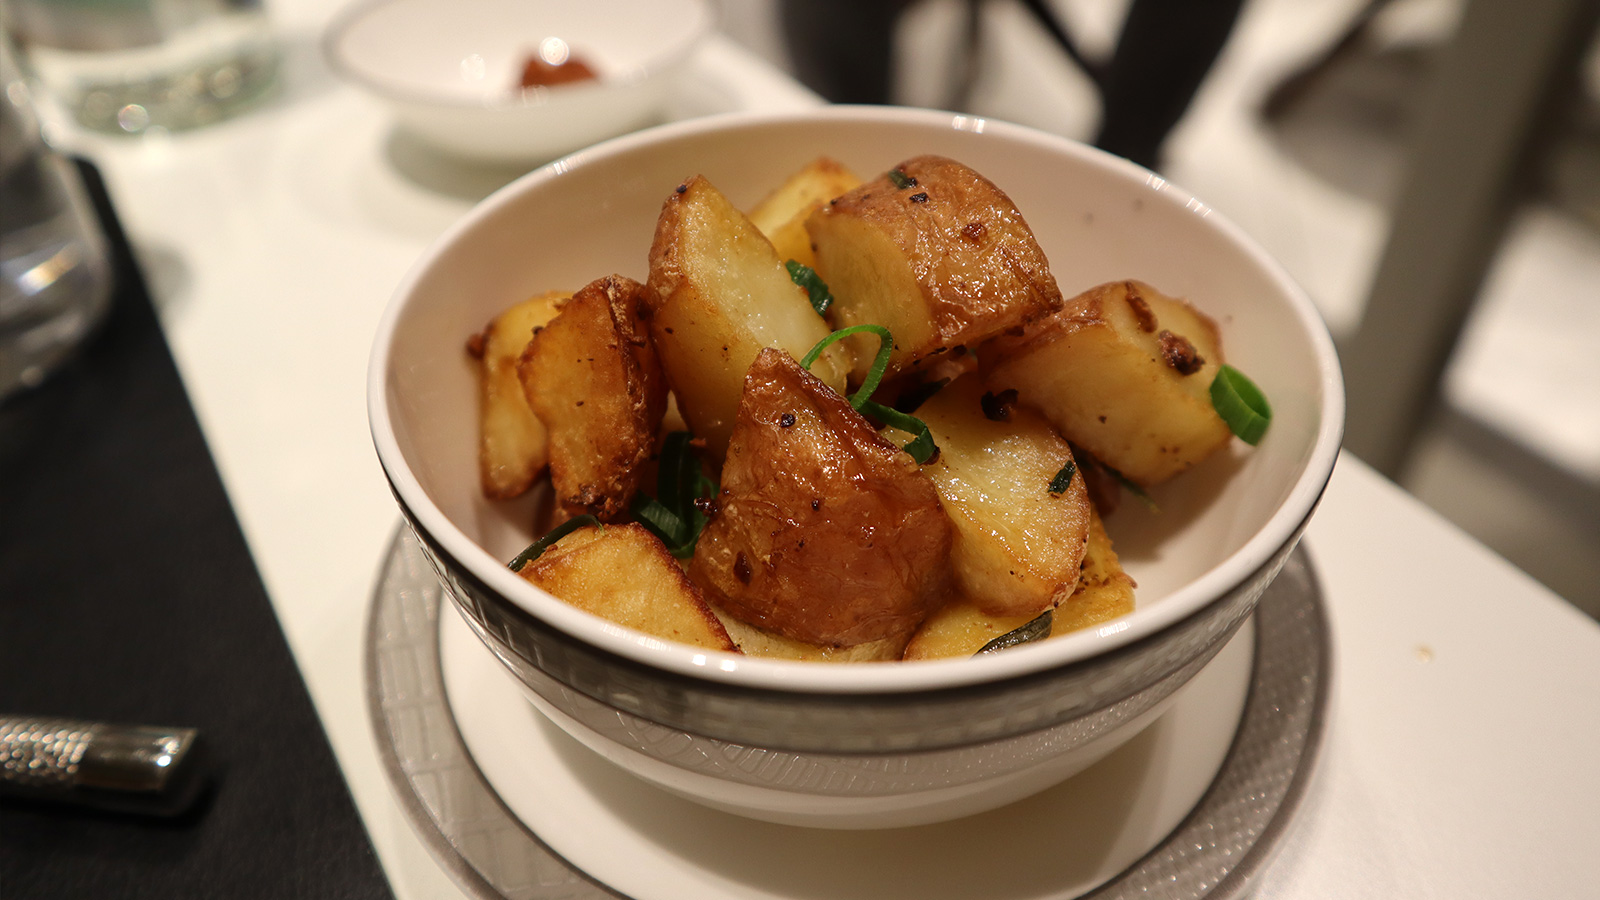 Rosemary roasted potatos in the Singapore Airlines SilverKris First Class Lounge, Melbourne